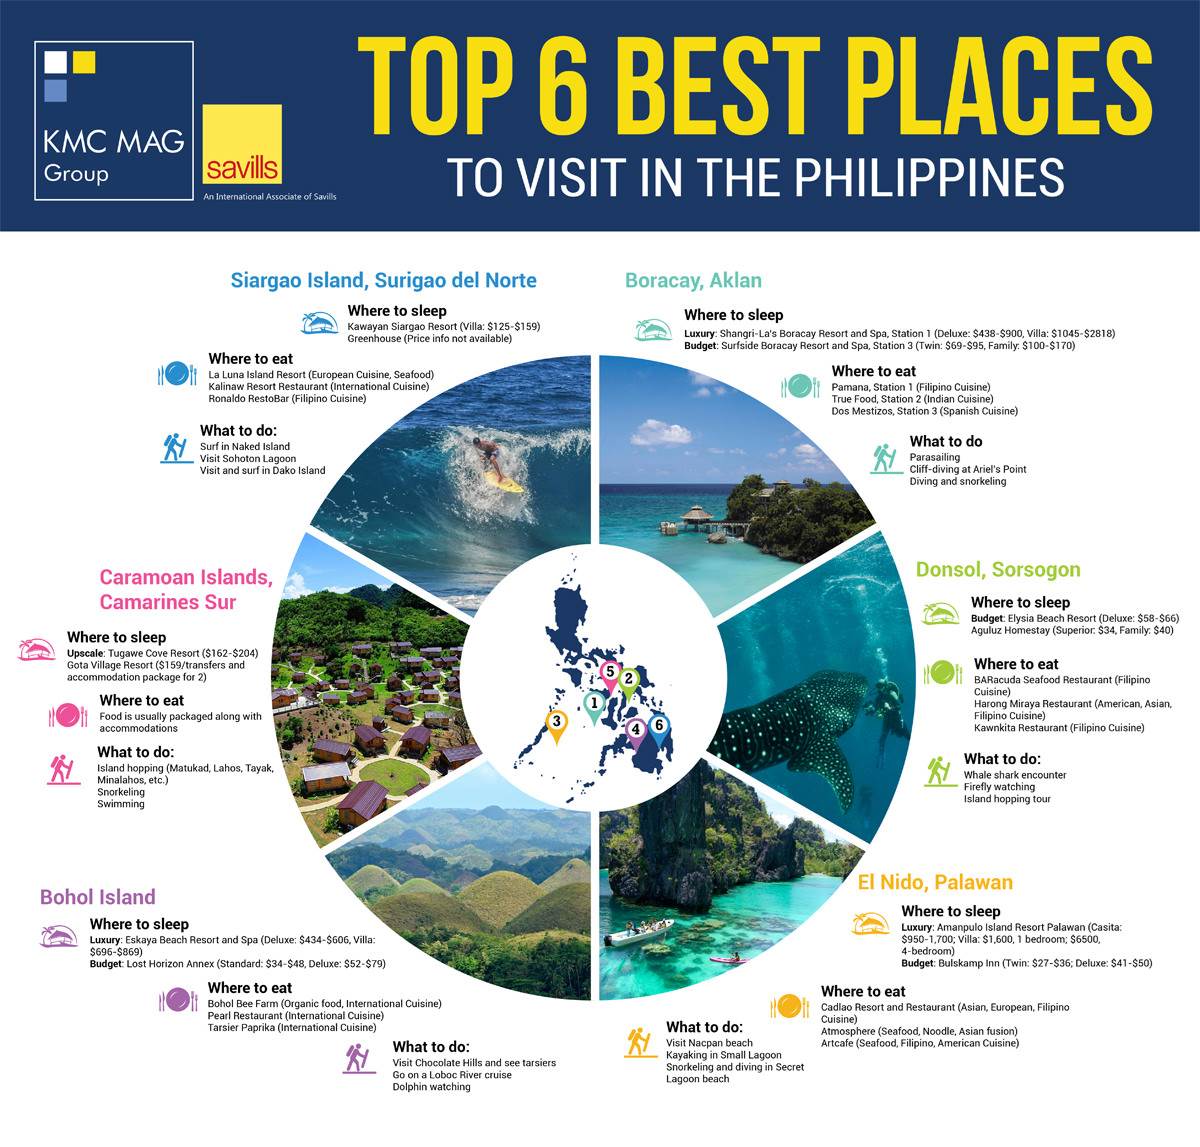 Top 6 Best Places to Visit in the Philippines (Infographic)